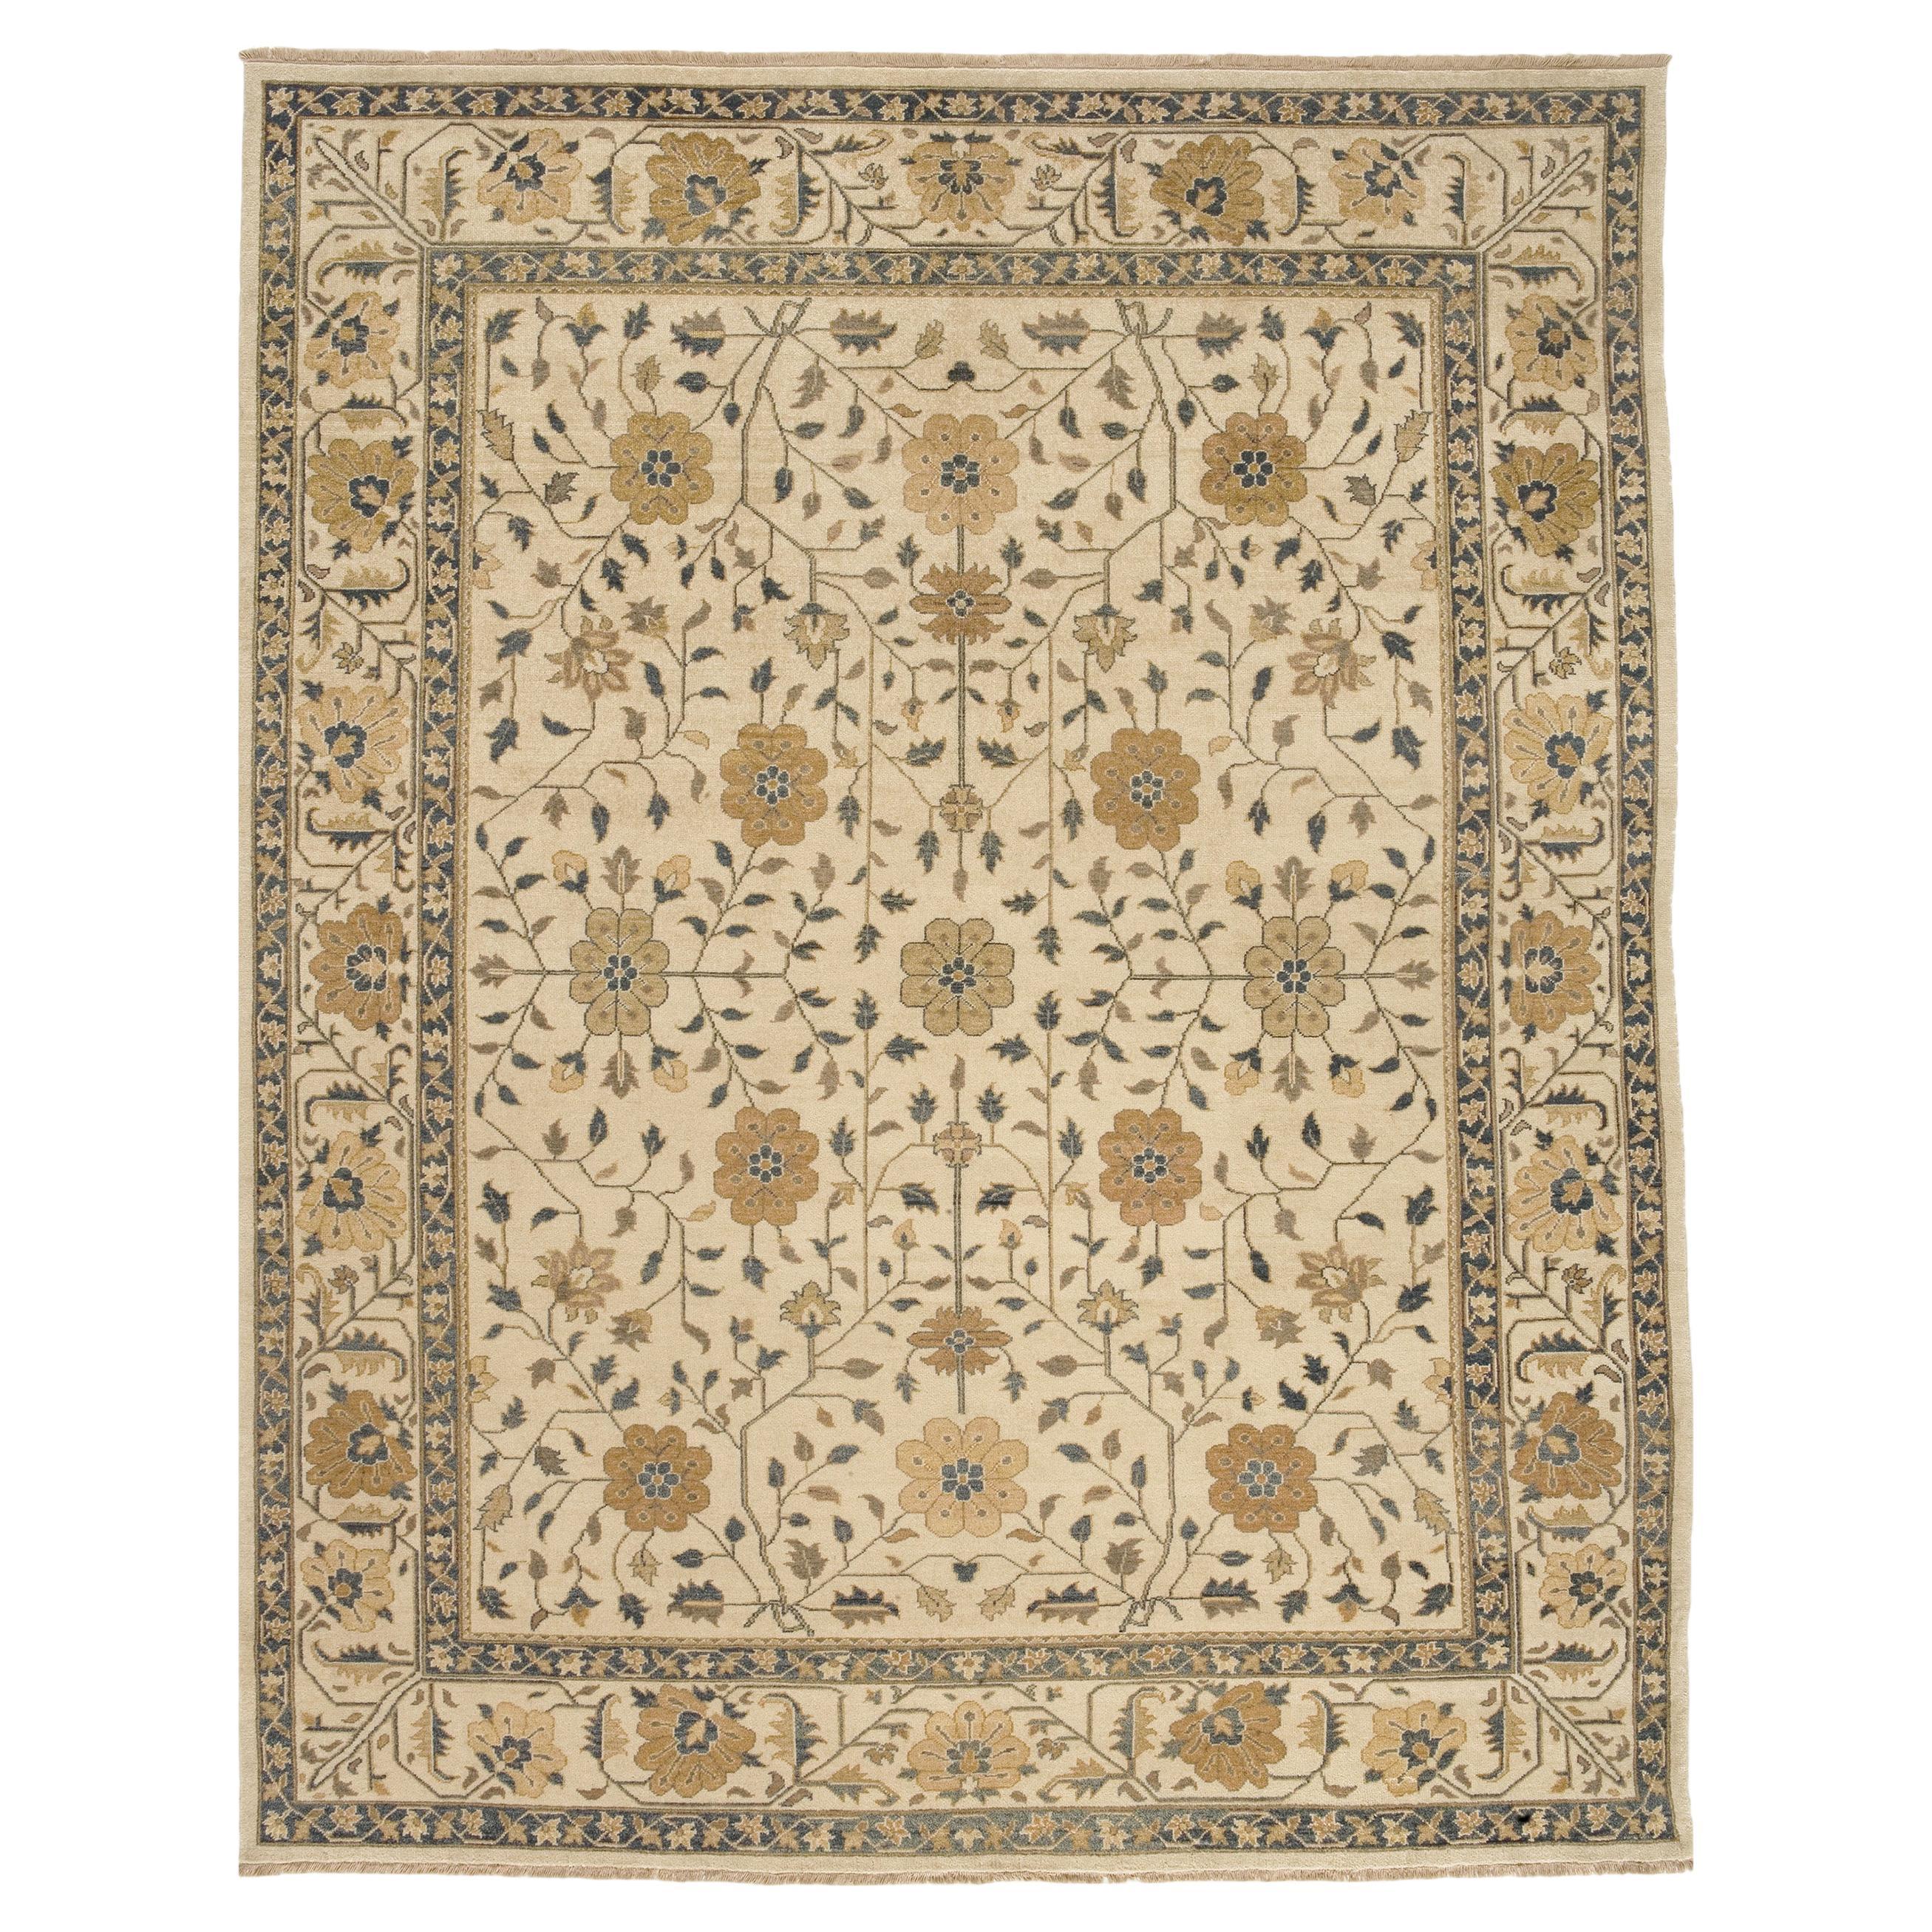 Luxury Traditional Hand-Knotted Jinan Cream 14x26 Rug